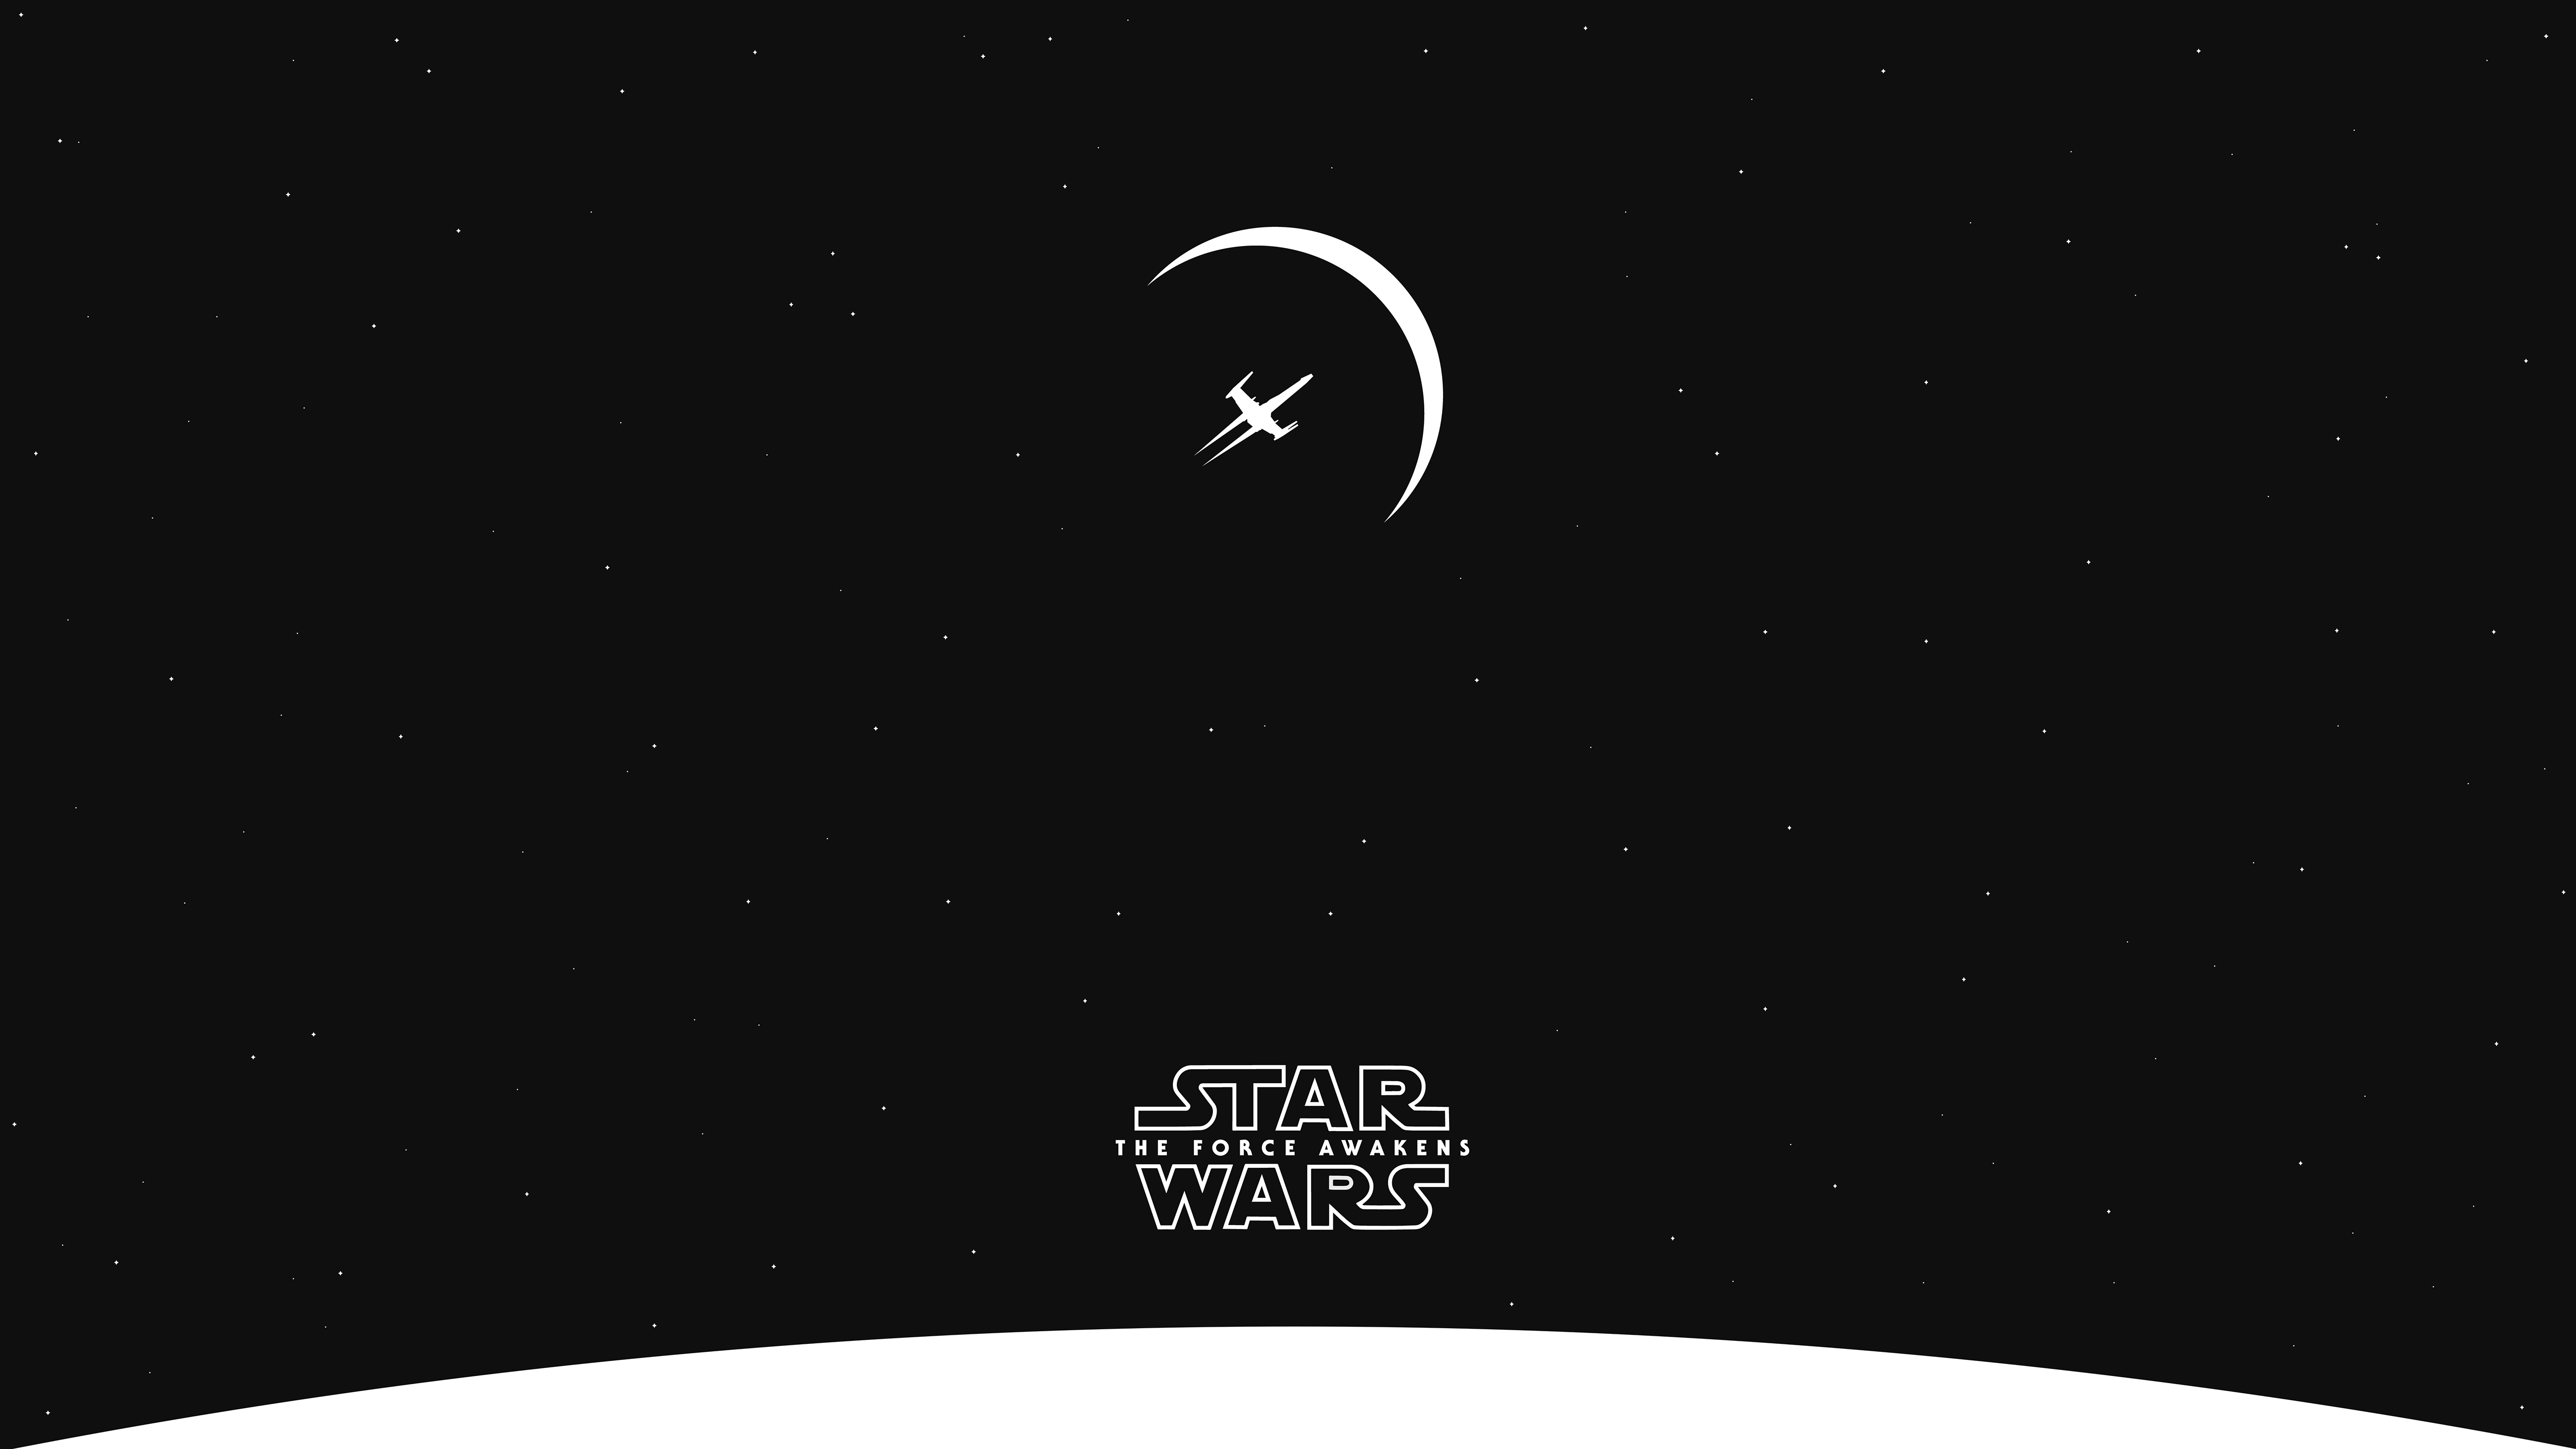 General 5120x2880 Star Wars: The Force Awakens Star Wars minimalism X-wing stars planet space science fiction movies